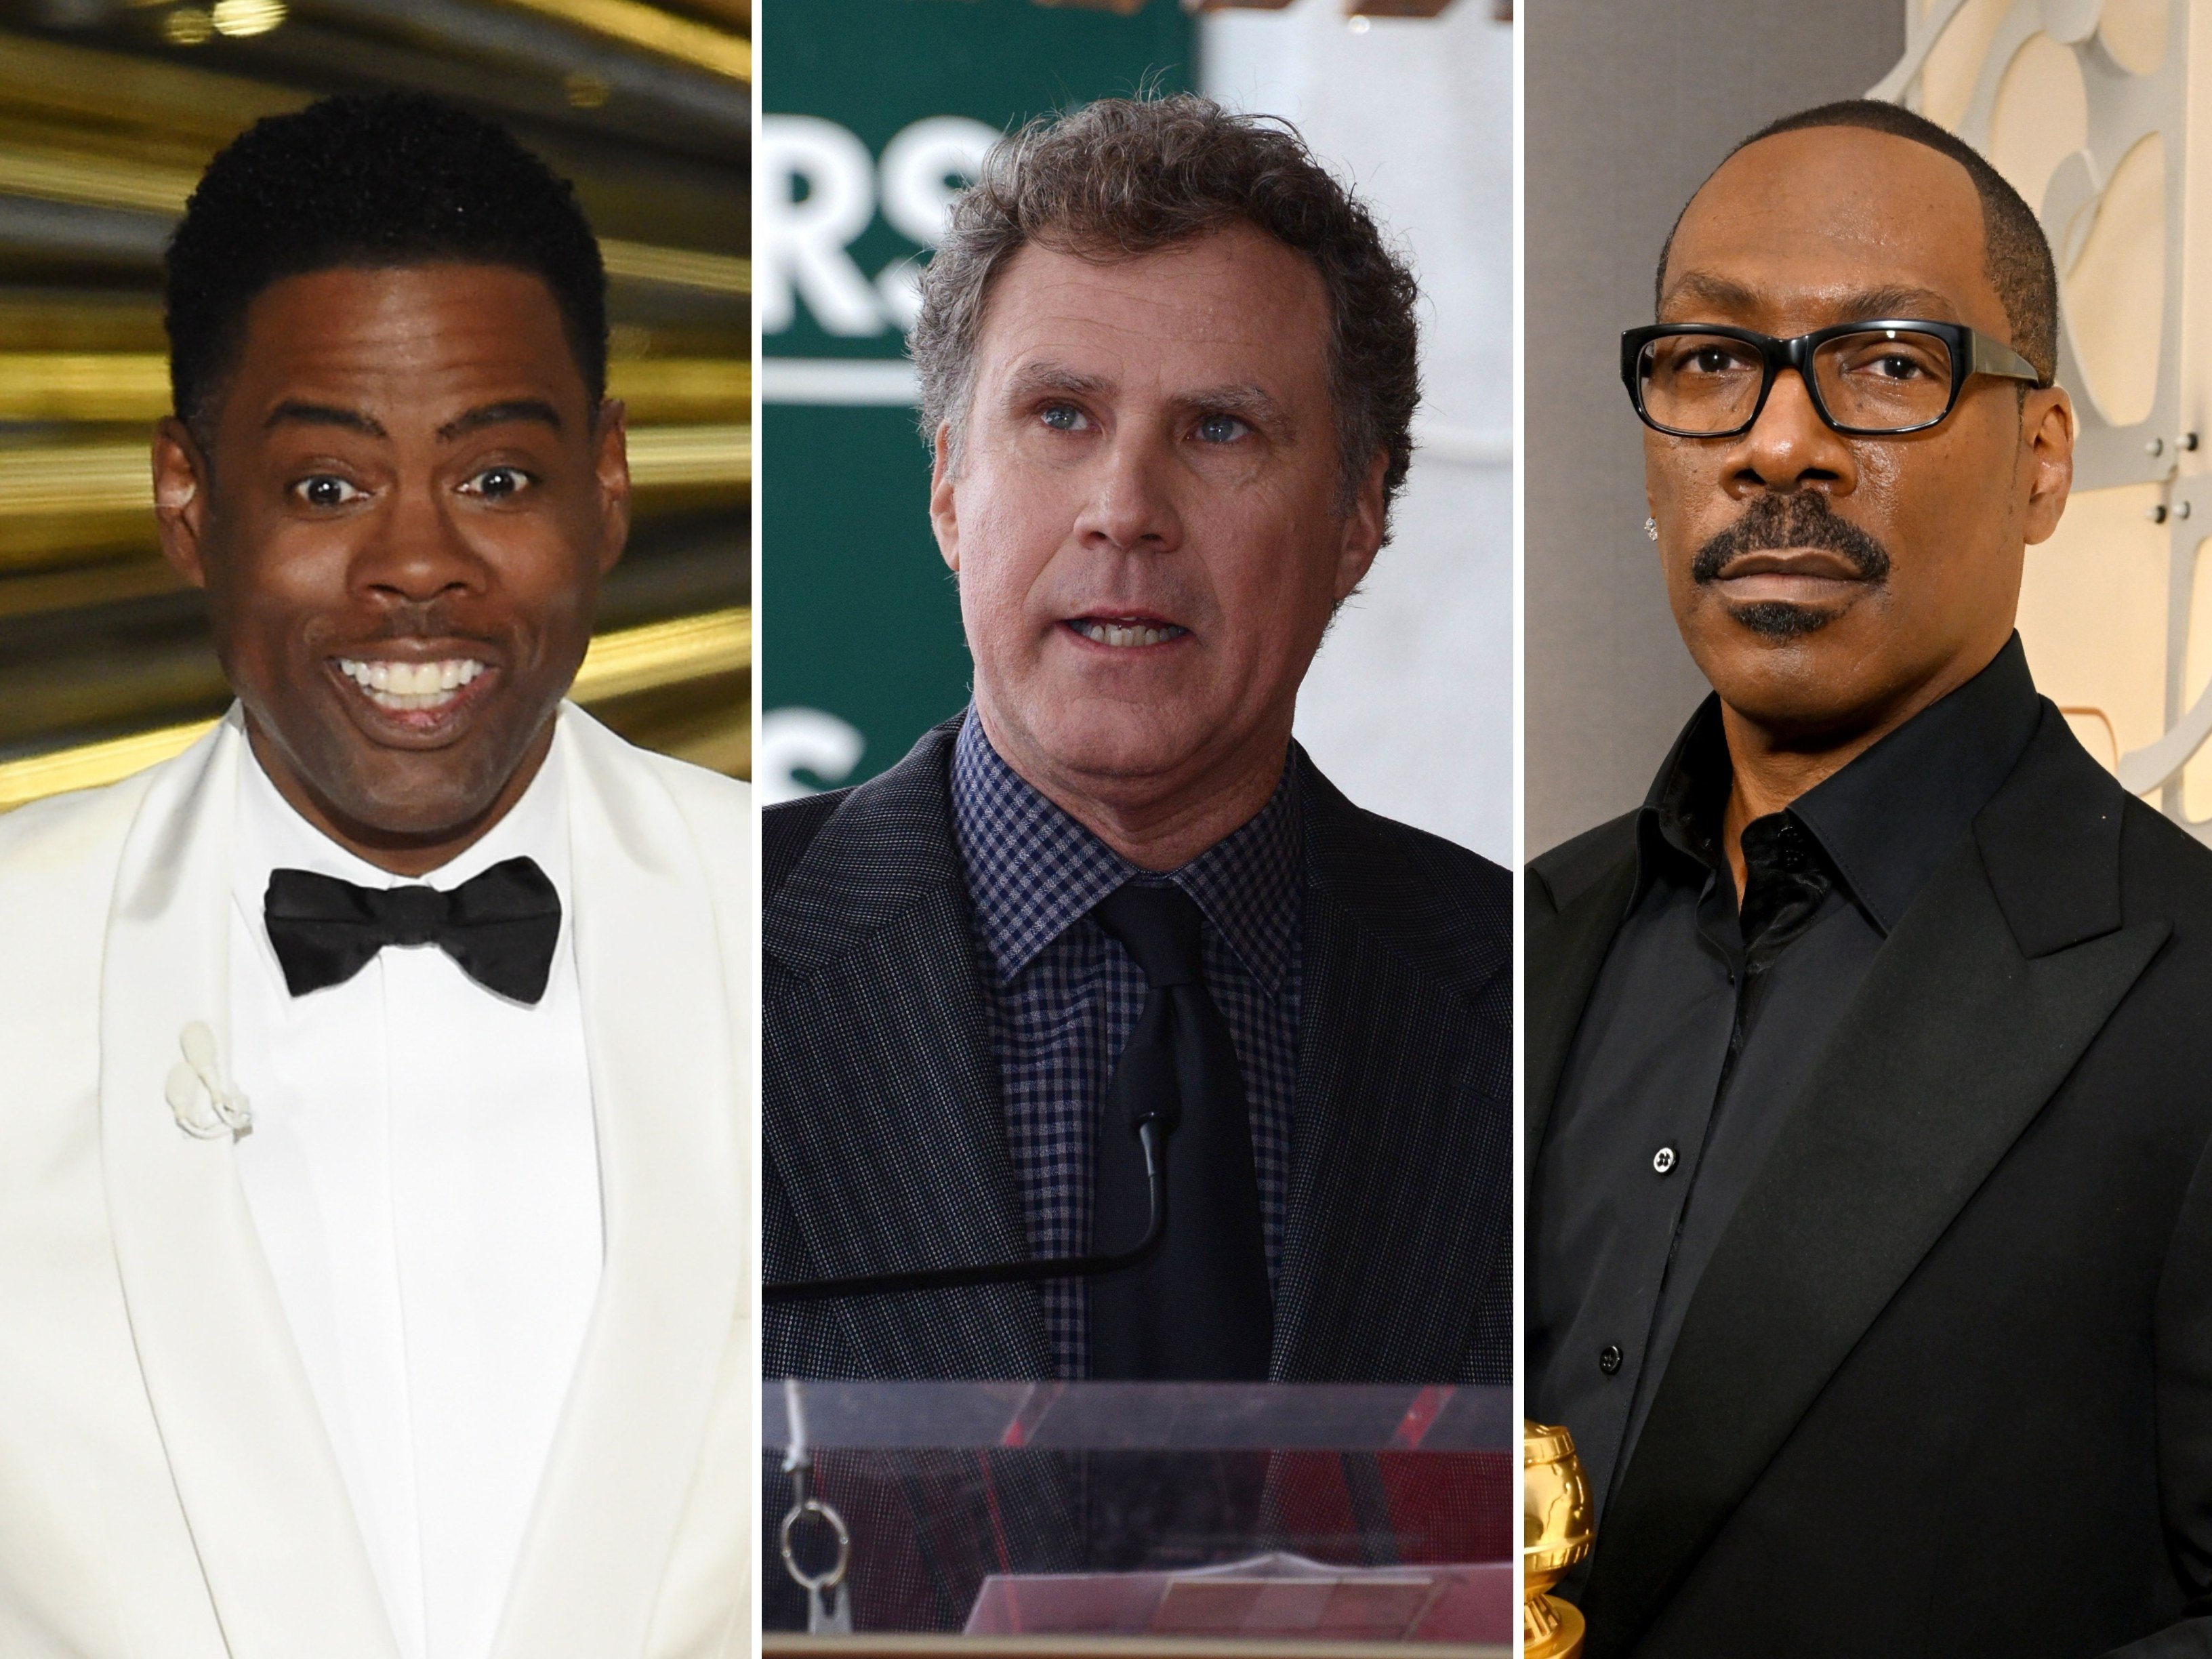 Chris Rock hosts the Oscars; Will Ferrell attends a ceremony at the Hollywood Walk of Fame; Eddie Murphy attends an undisclosed event. Which SNL alumni has earned the most to date, though? Photos: Getty, AFP